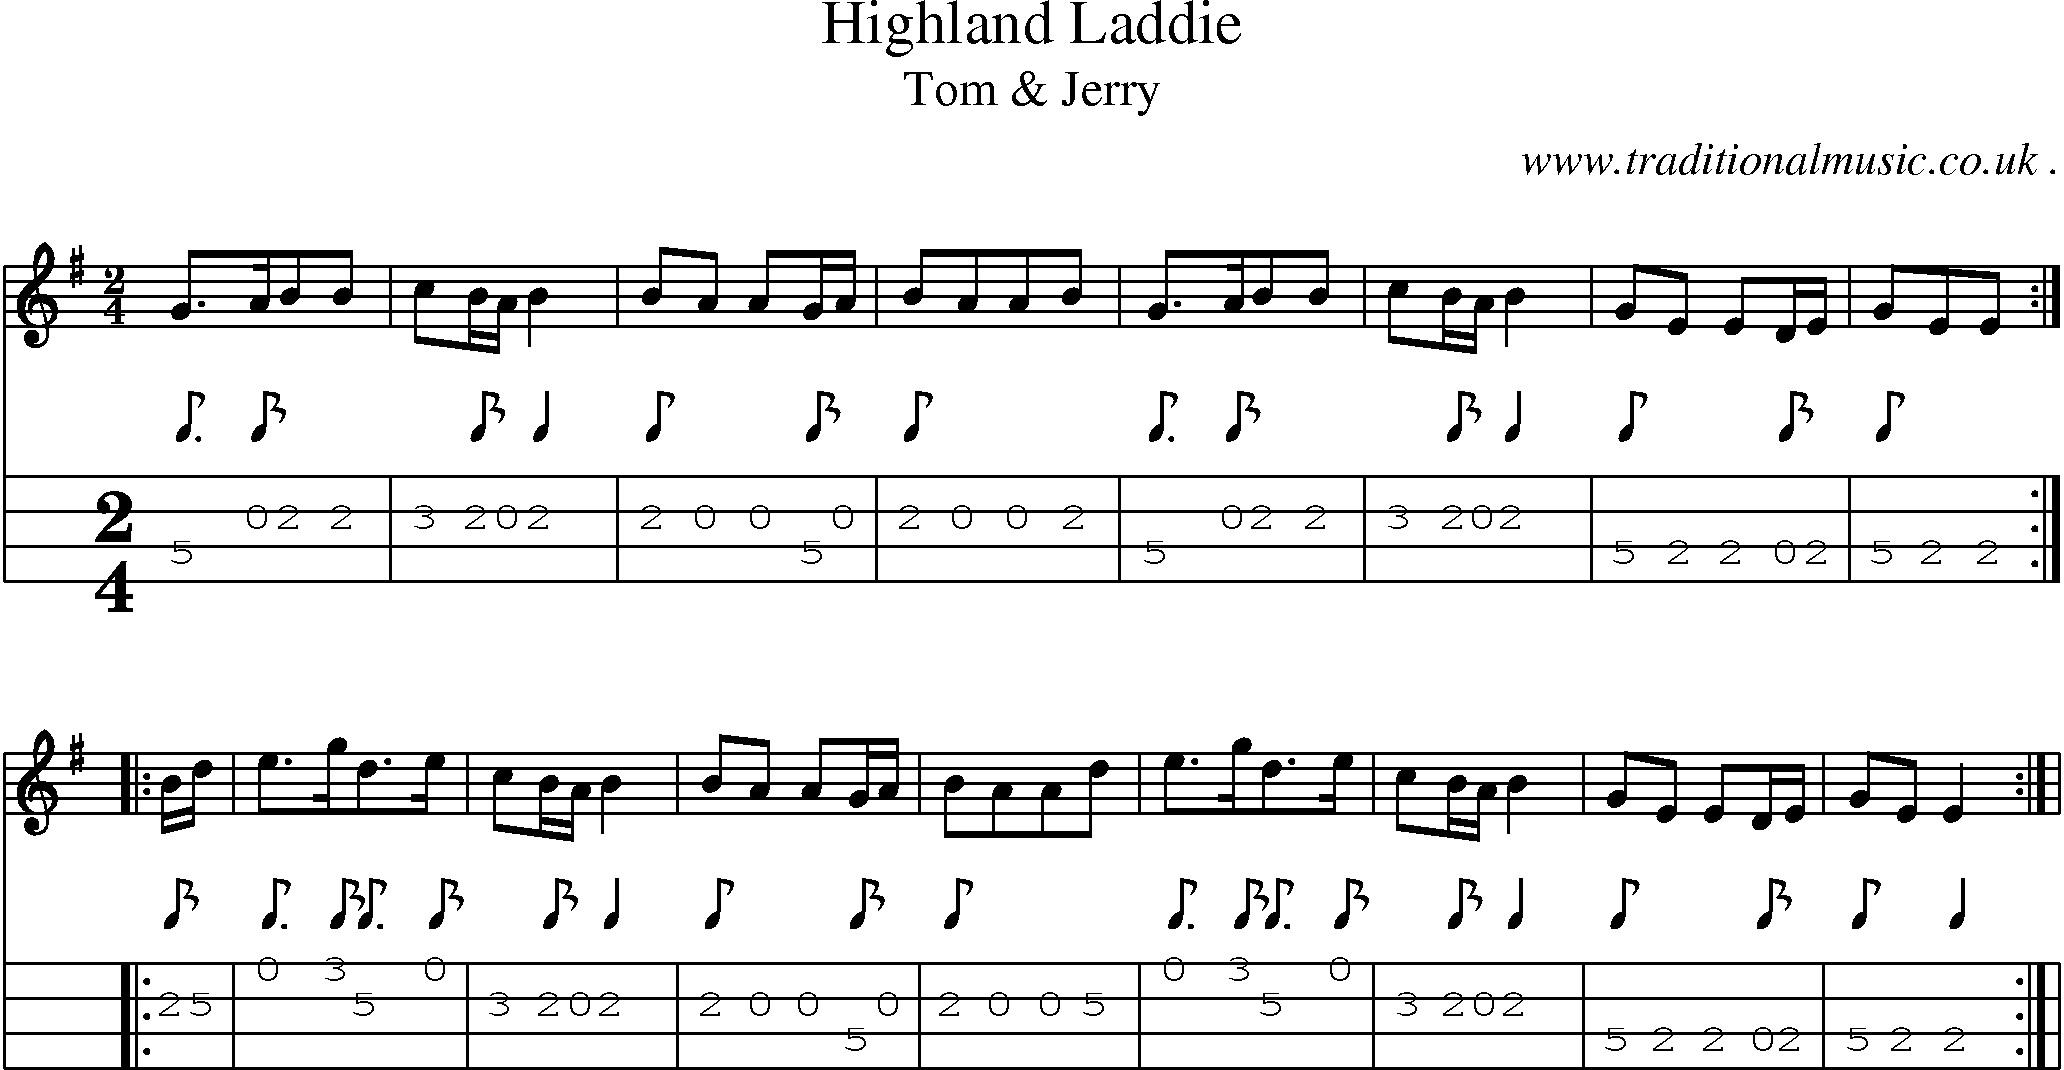 Sheet-Music and Mandolin Tabs for Highland Laddie